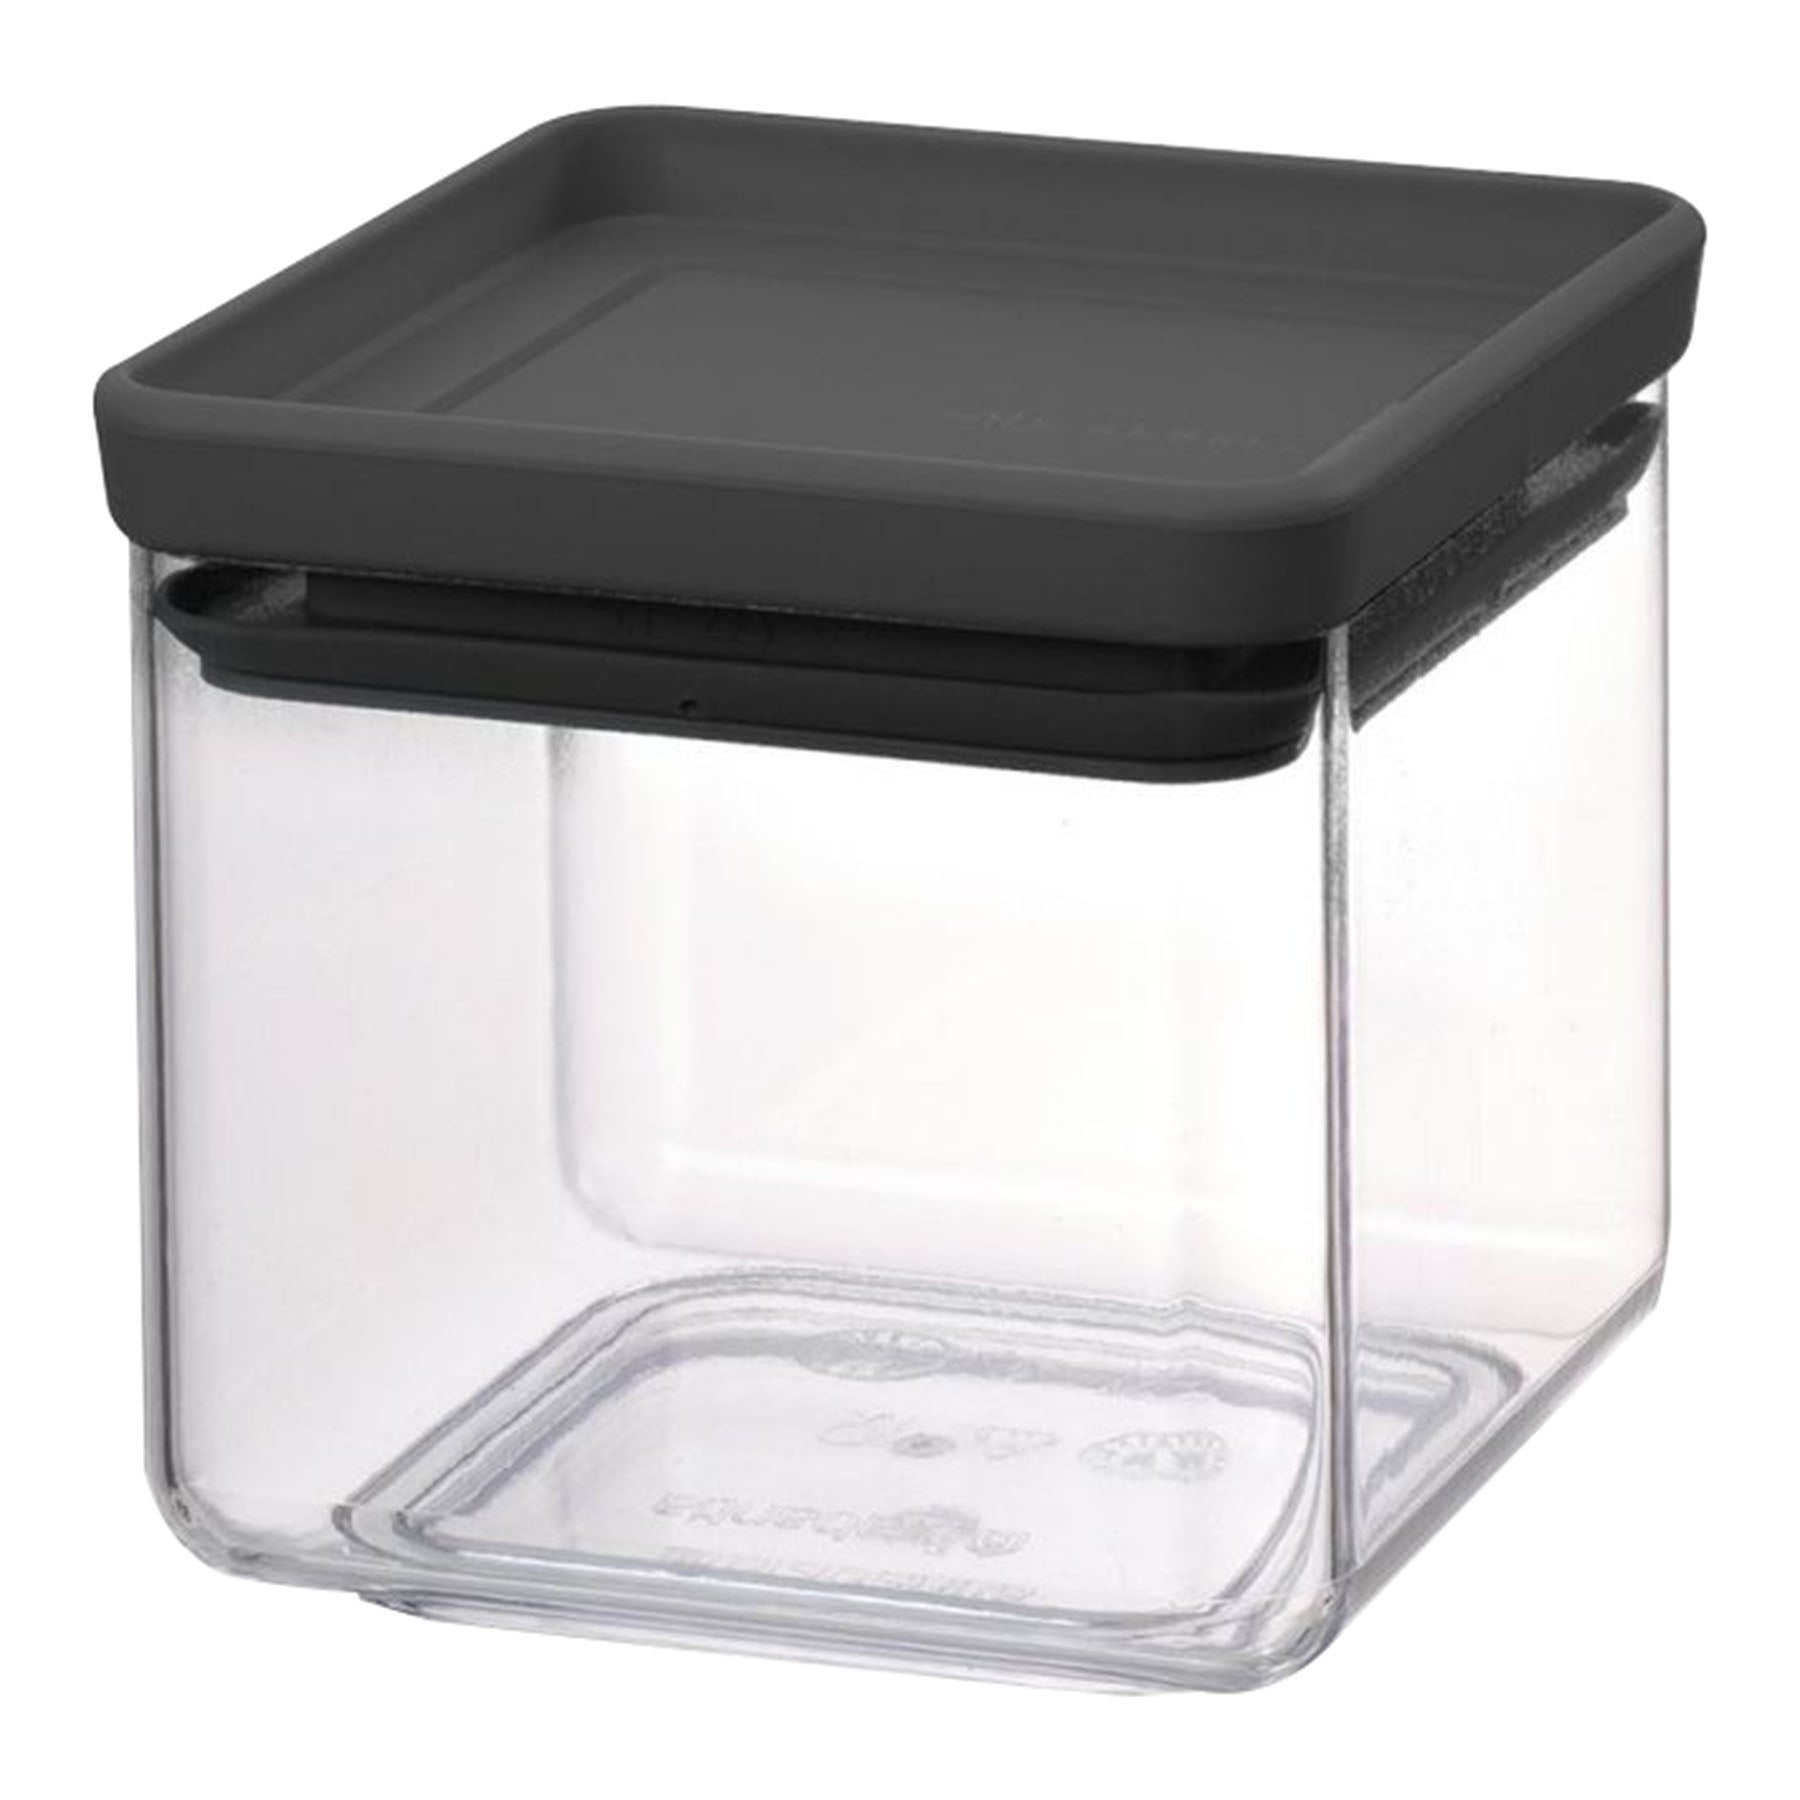 SQUARE CANISTER Capacity volume (ltr): 0.7 litres